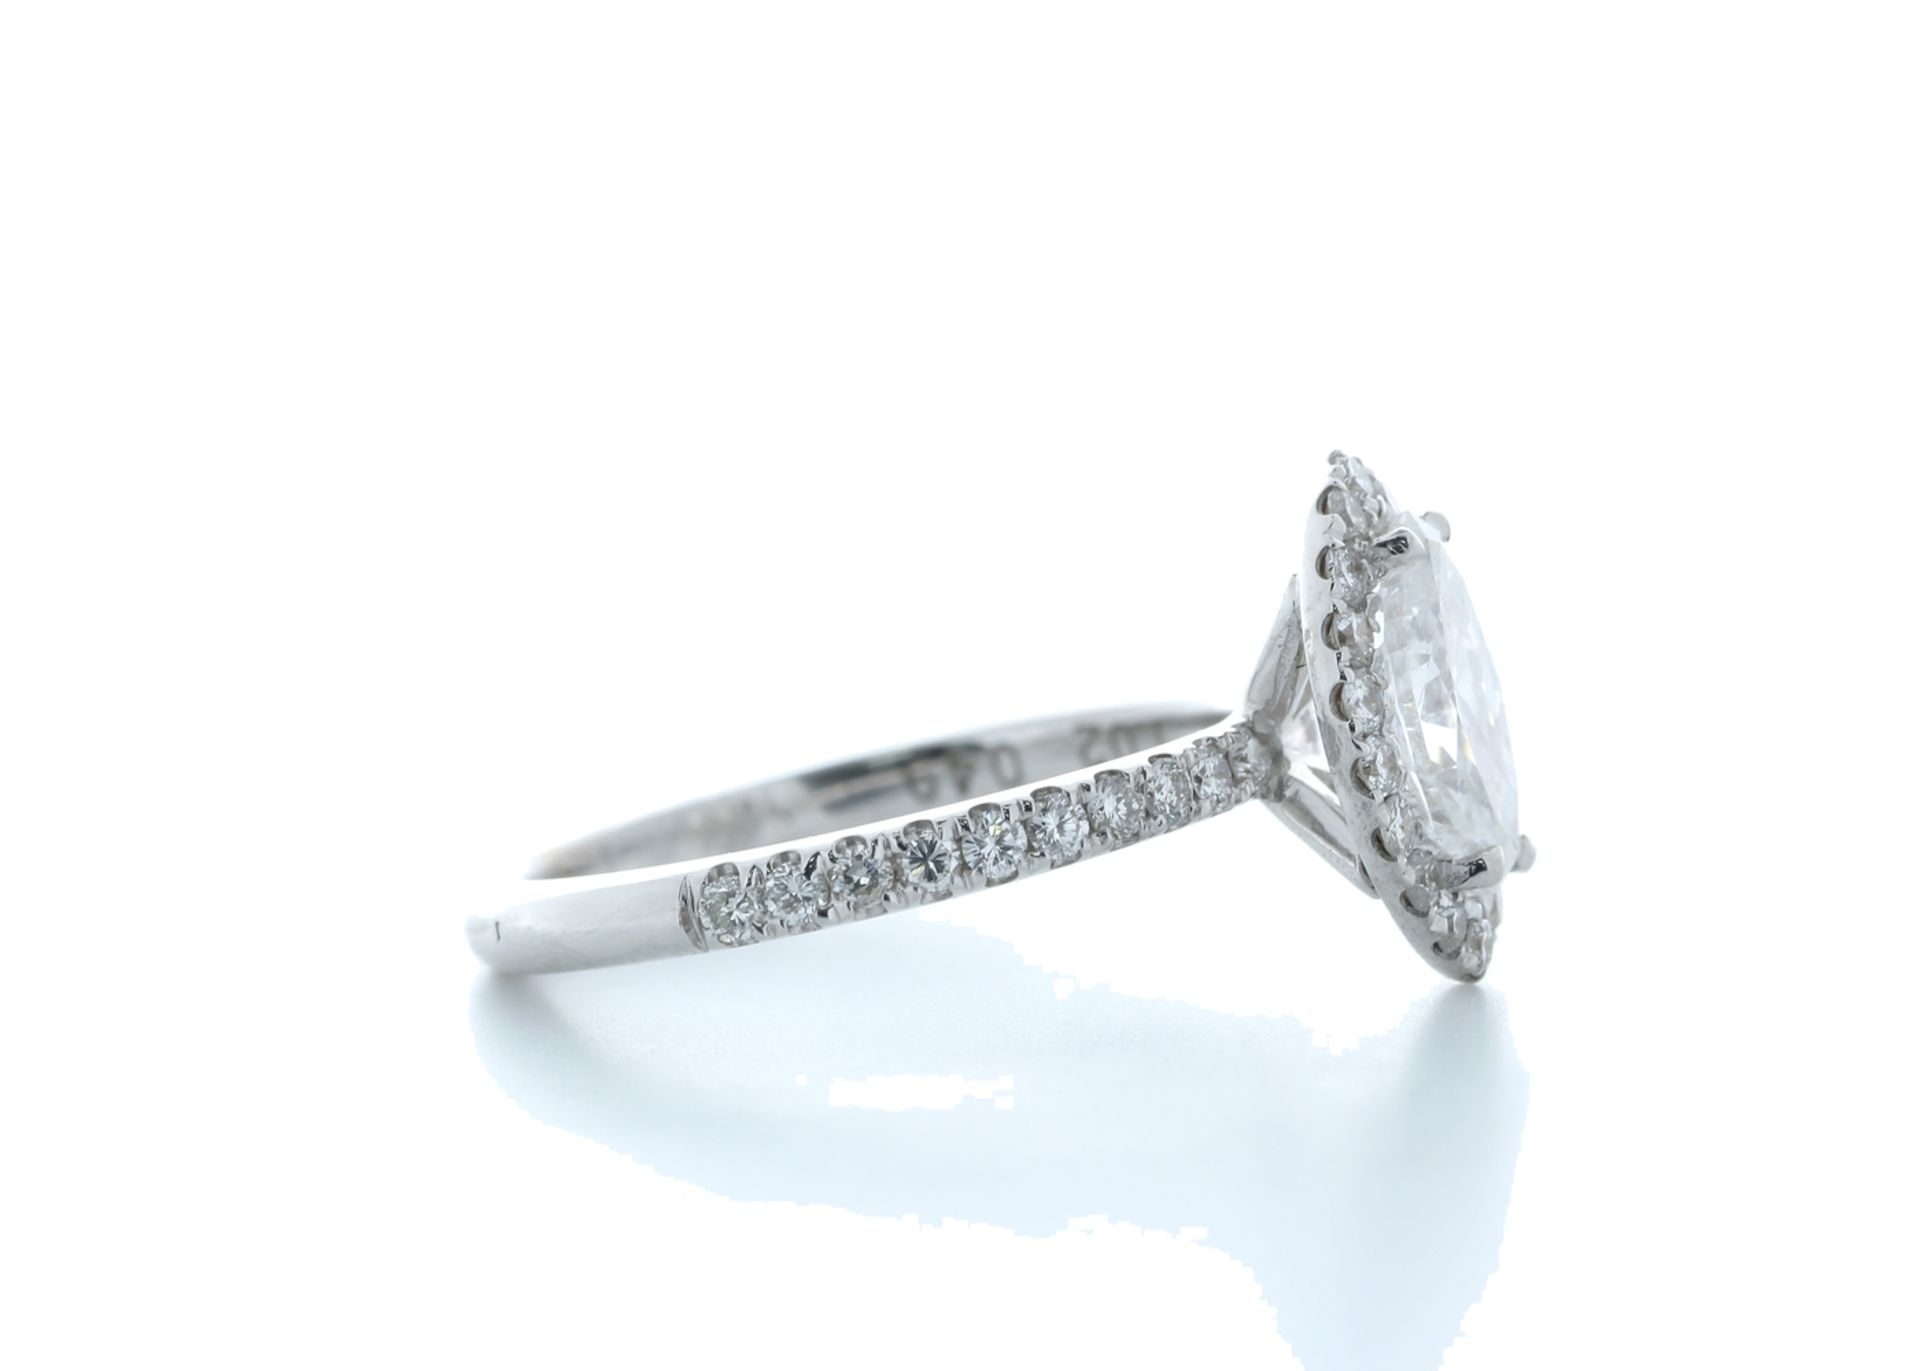 18ct White Gold Marquise Diamond With Halo Setting Ring 1.51 (1.02) Carats - Valued by IDI £13,000. - Image 4 of 5